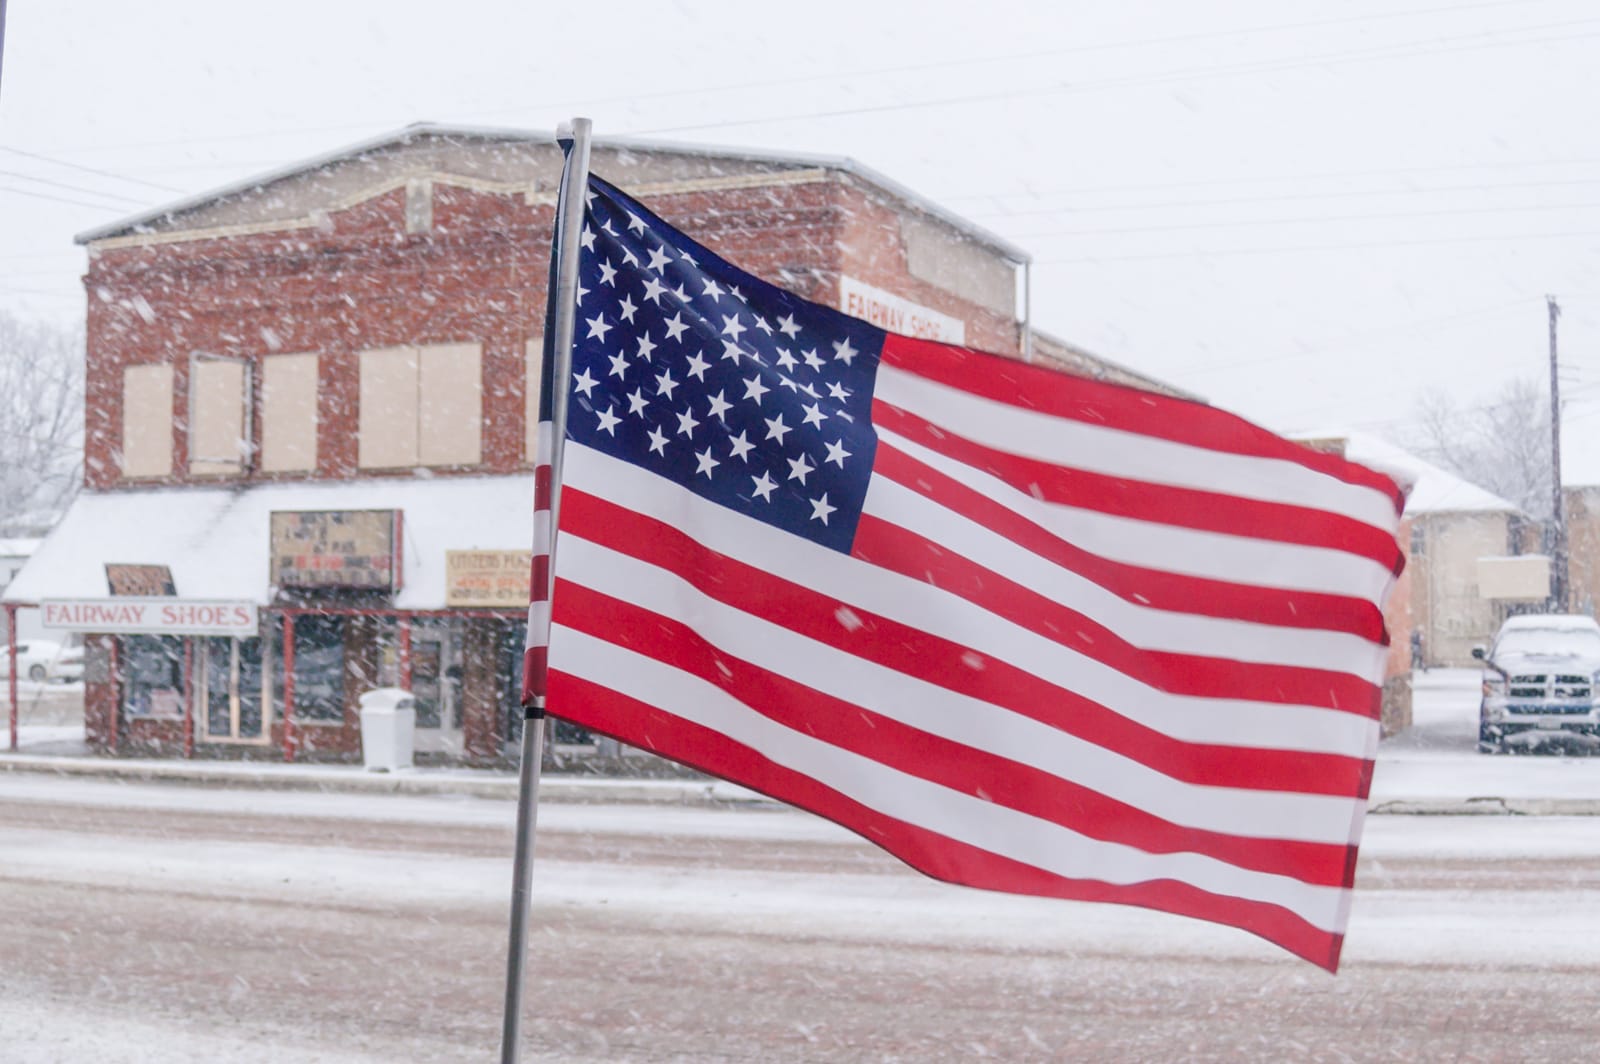 The American flag in Snowmageddon 2010